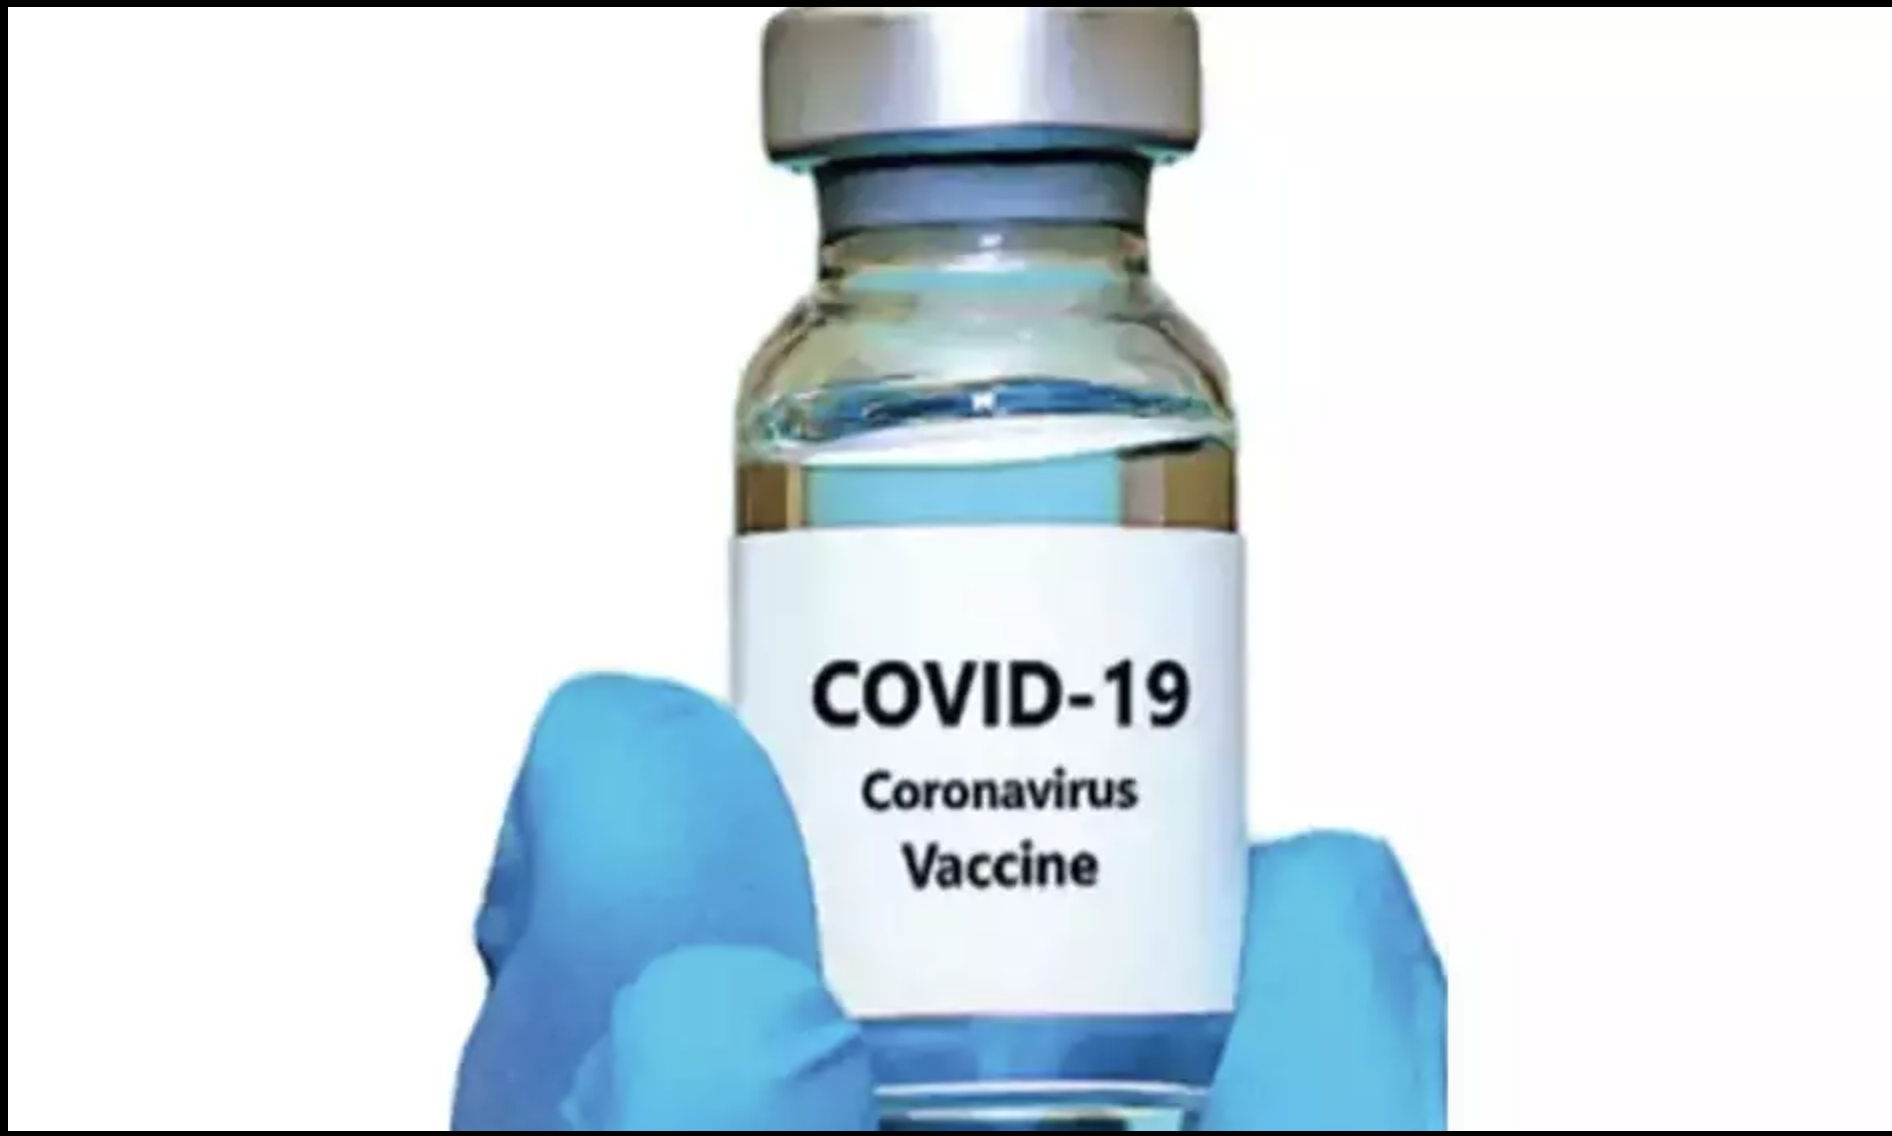 Covid-19 vaccine for every Indian above 18 years from May 1